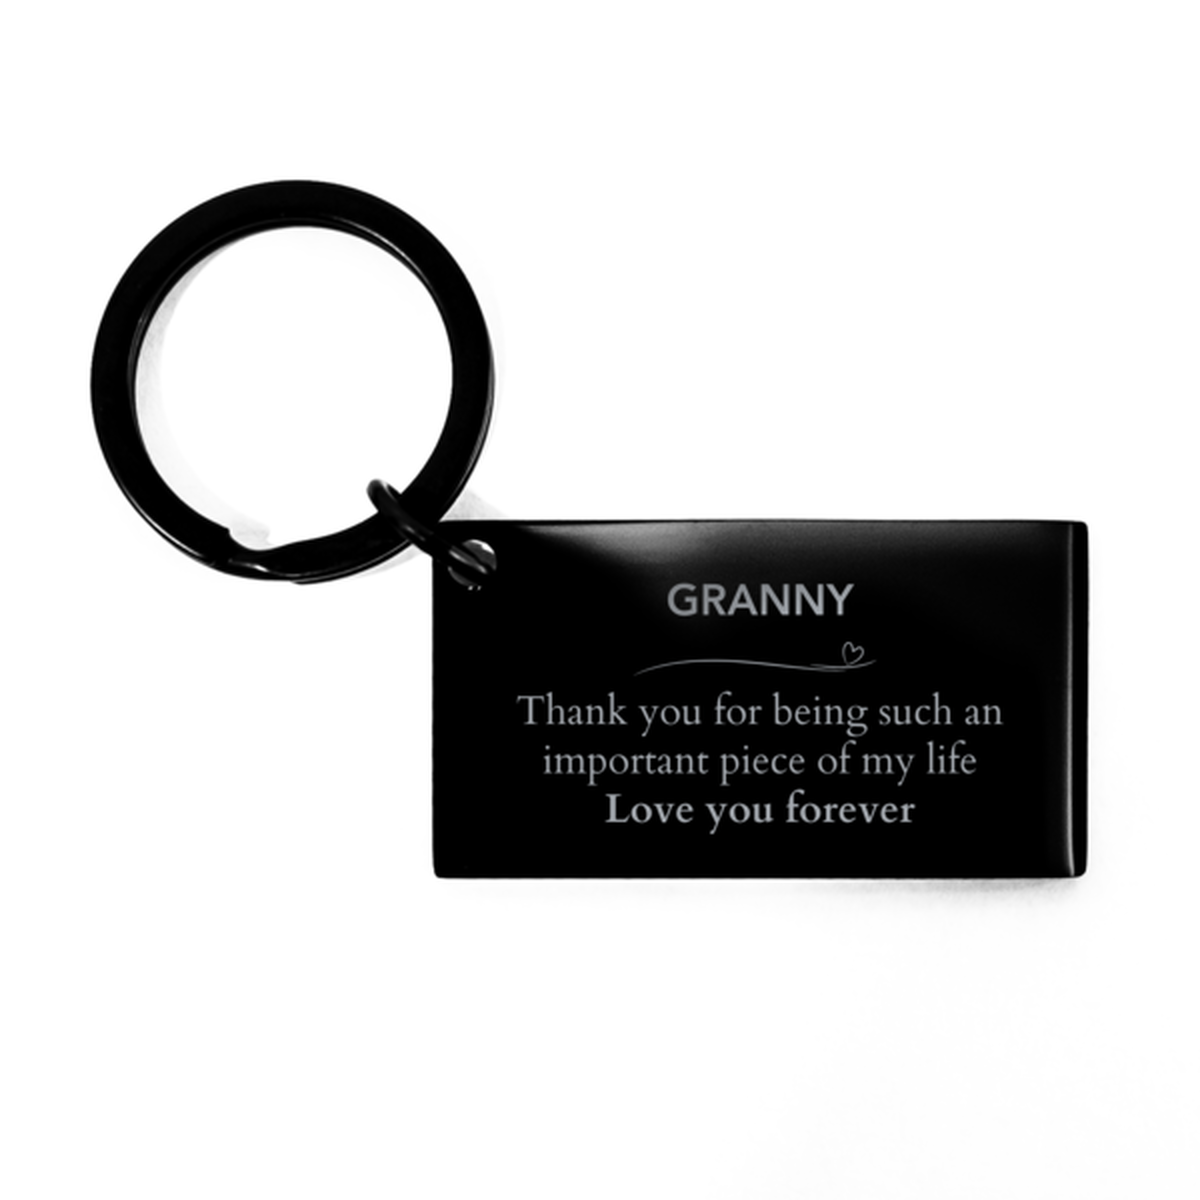 Appropriate Granny Keychain Epic Birthday Gifts for Granny Thank you for being such an important piece of my life Granny Christmas Mothers Fathers Day